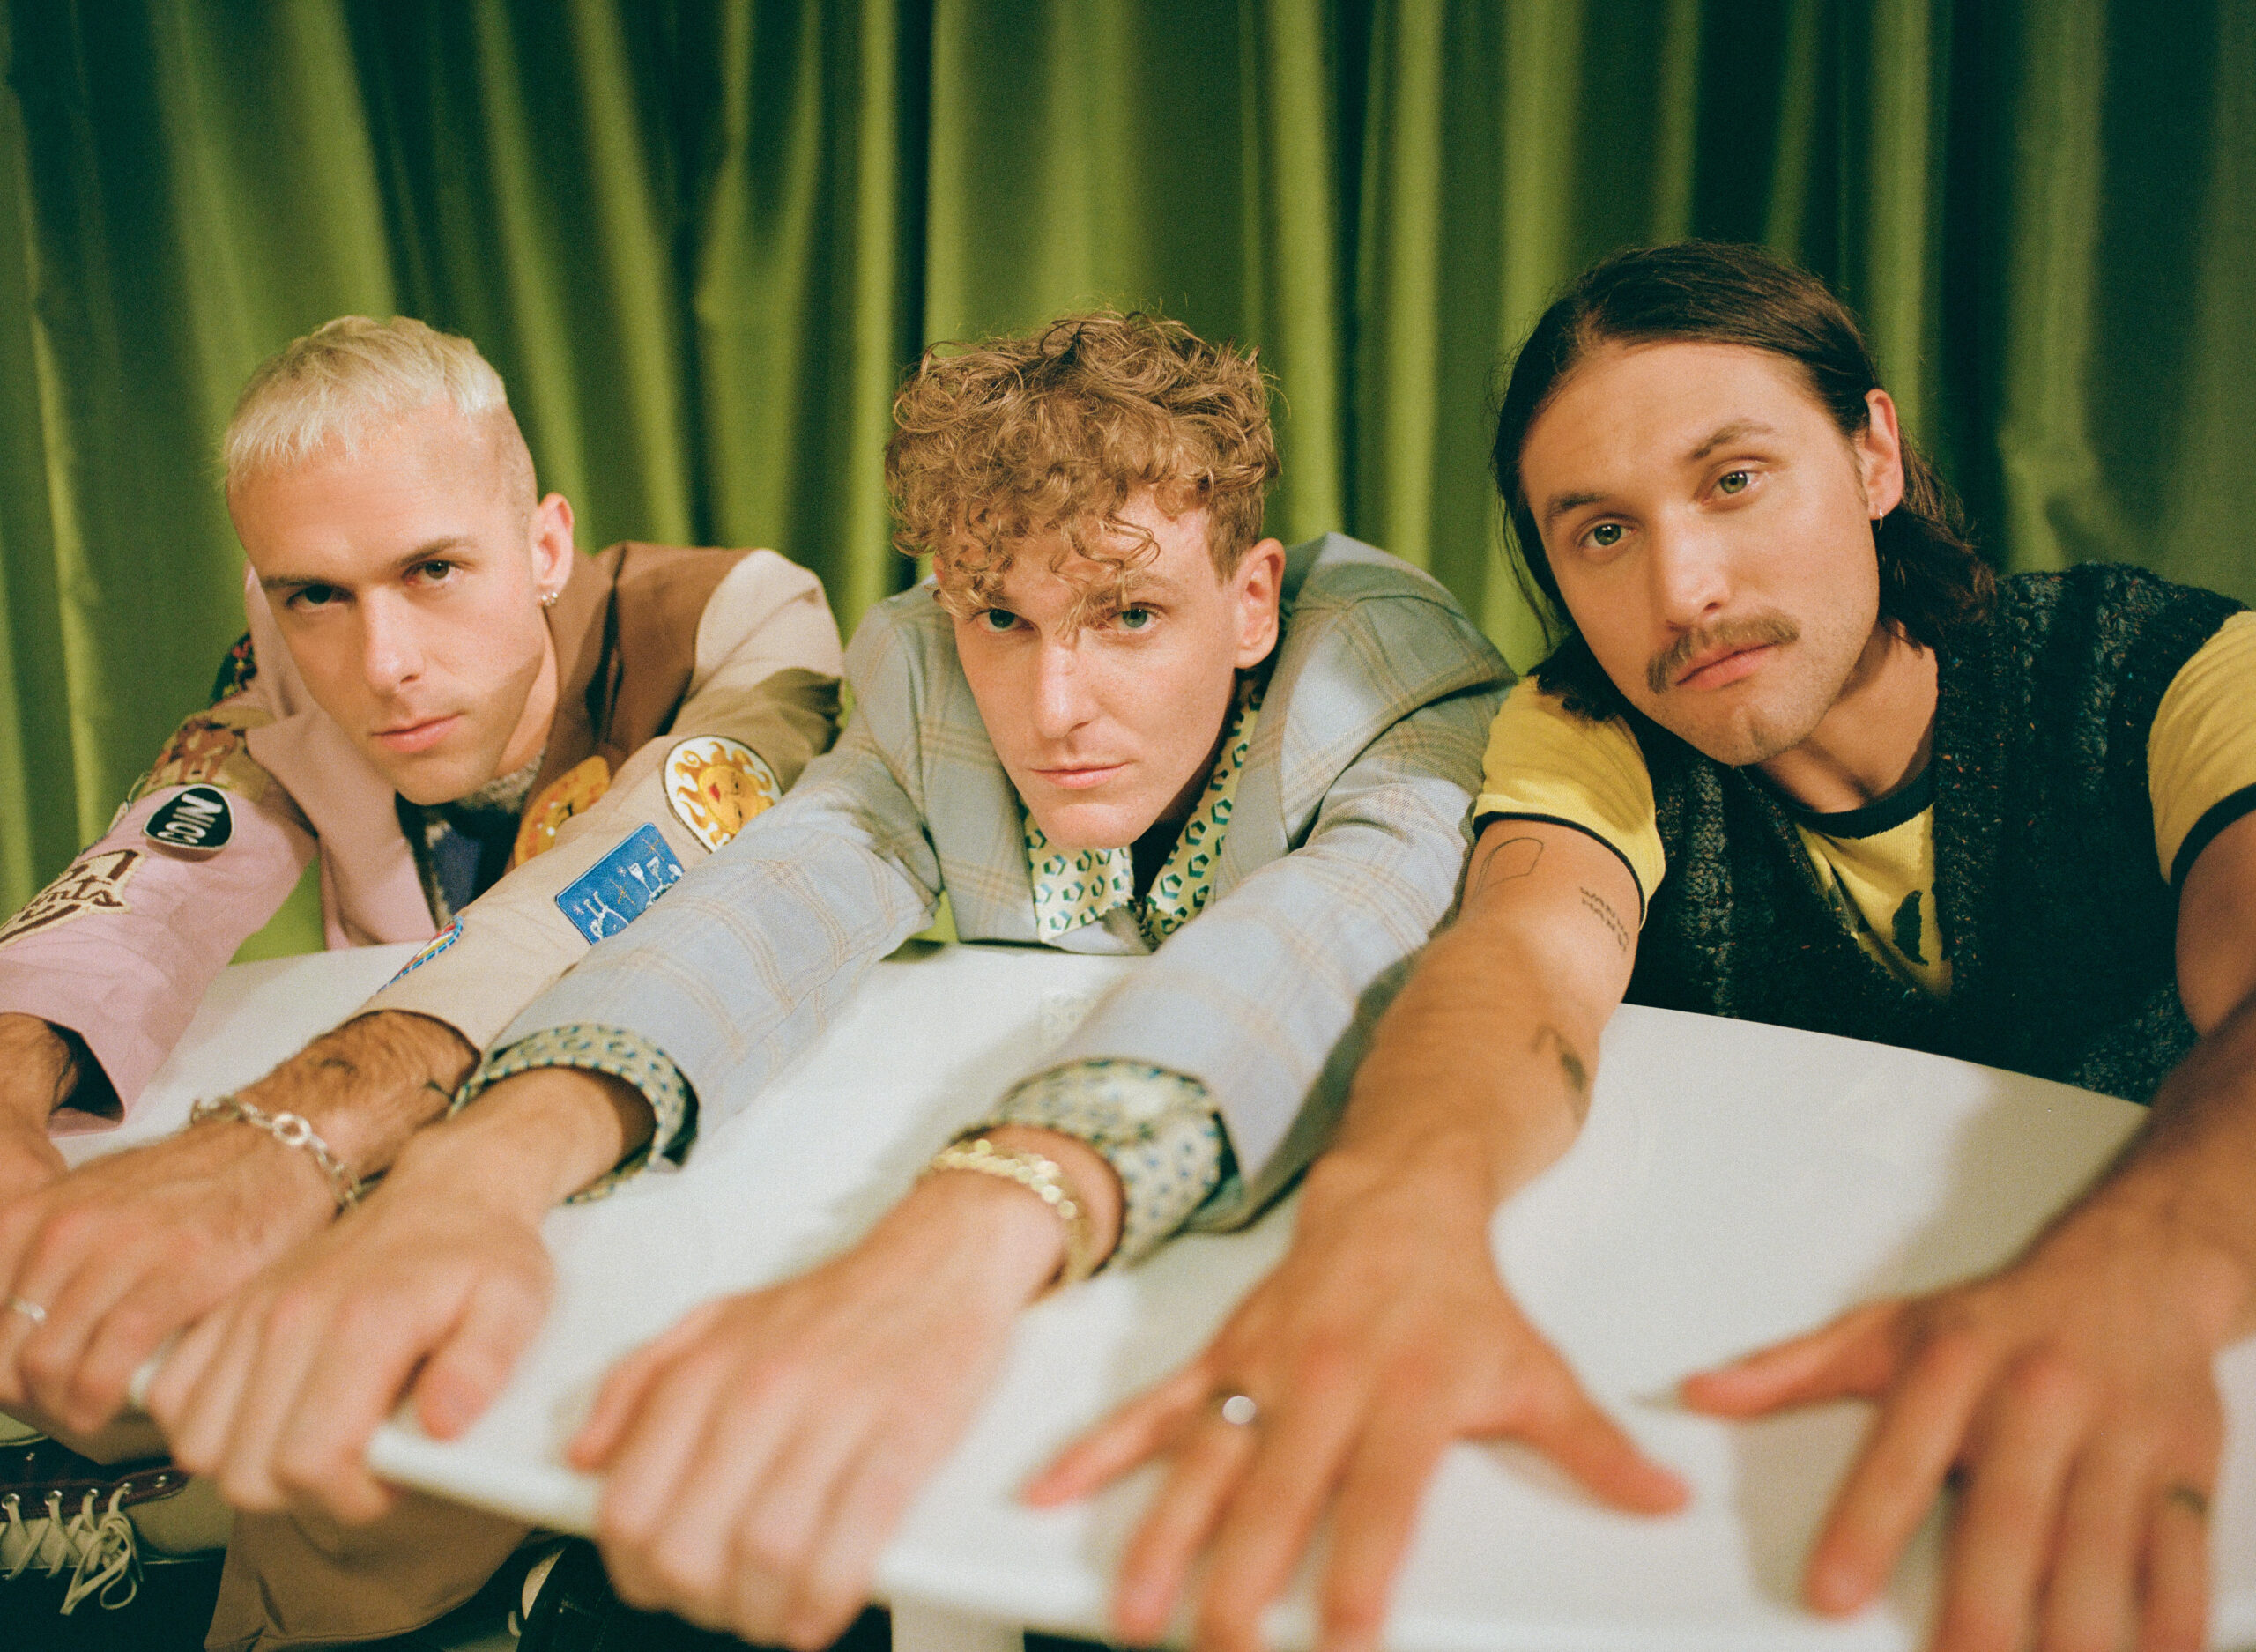 COIN channels first kiss feels in new single “Chapstick”